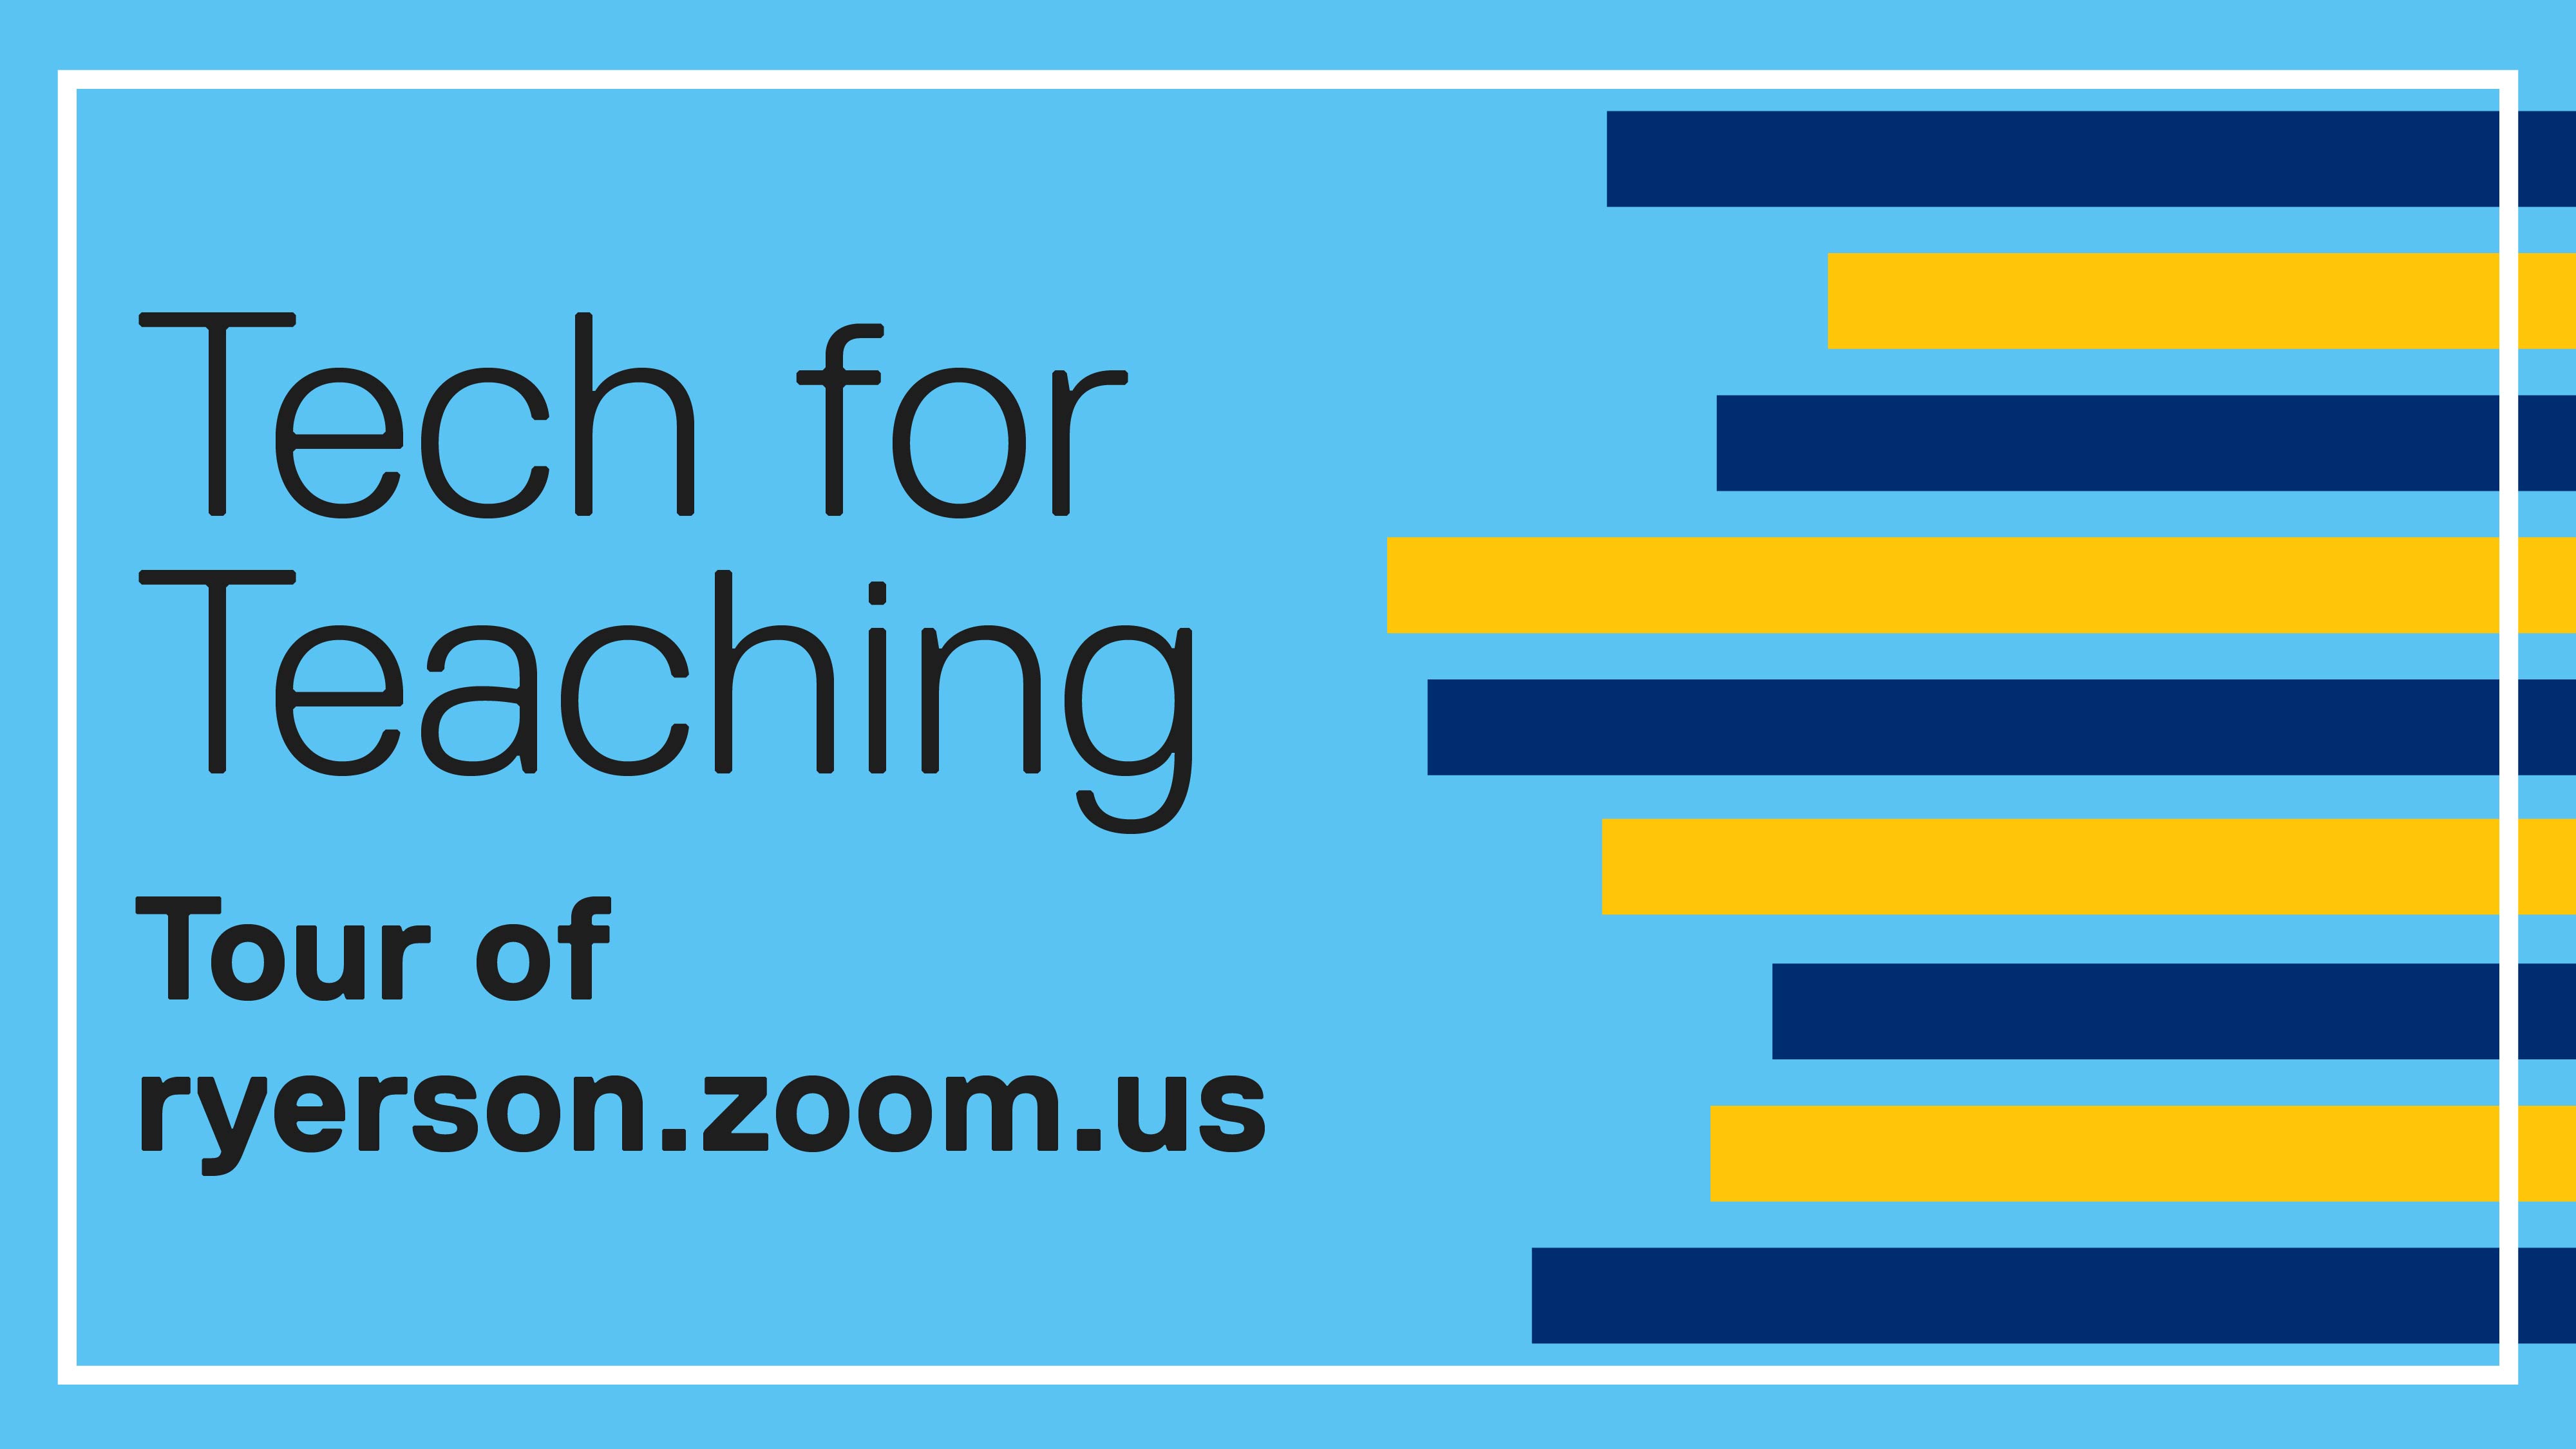 Tech for Teaching: Tour of ryerson.zoom.us